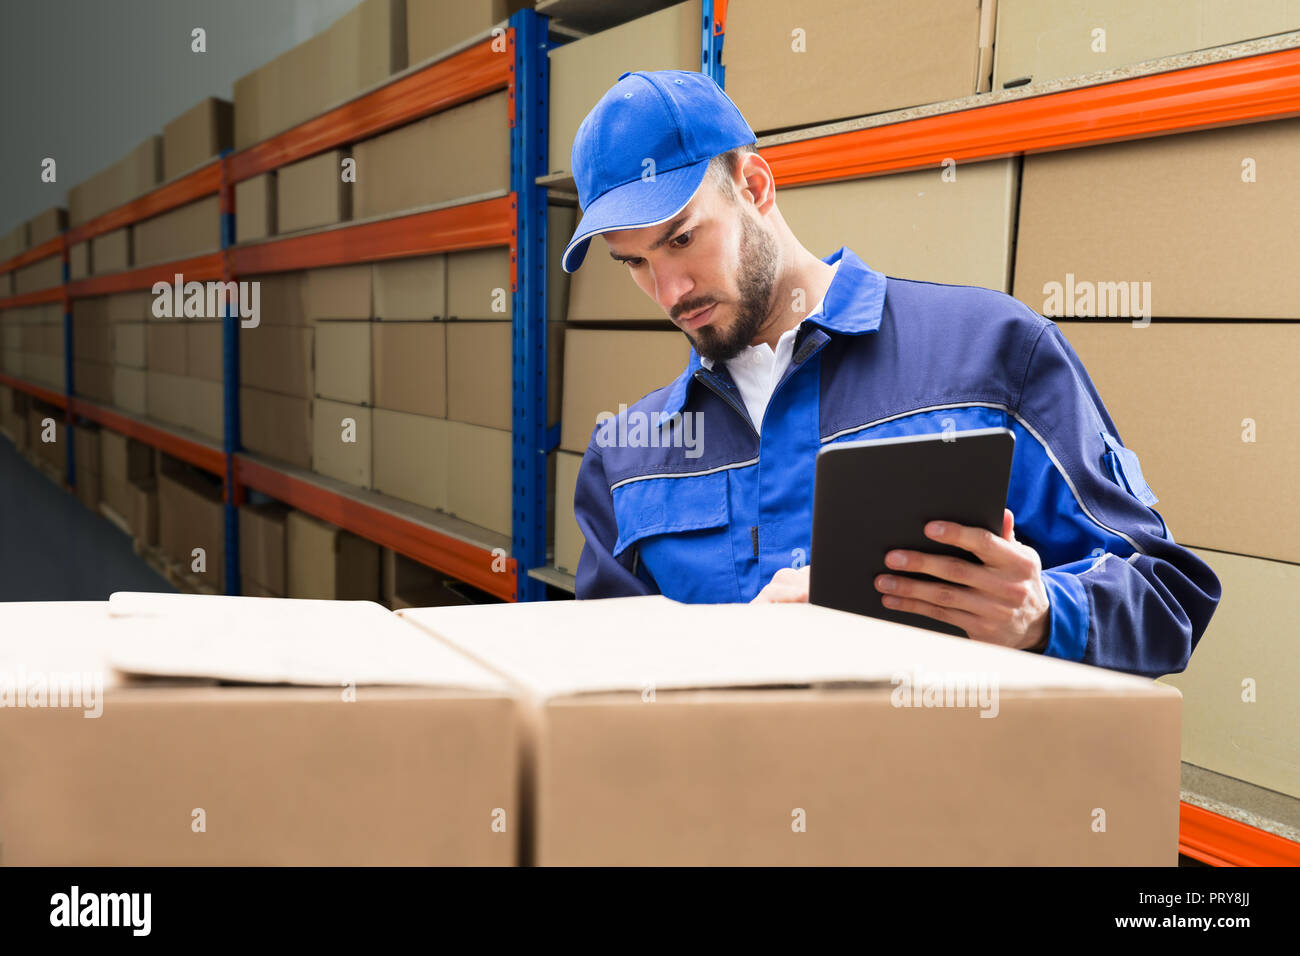 Young Delivery Man In Uniform Checking His Package On Digital Tablet Stock Photo